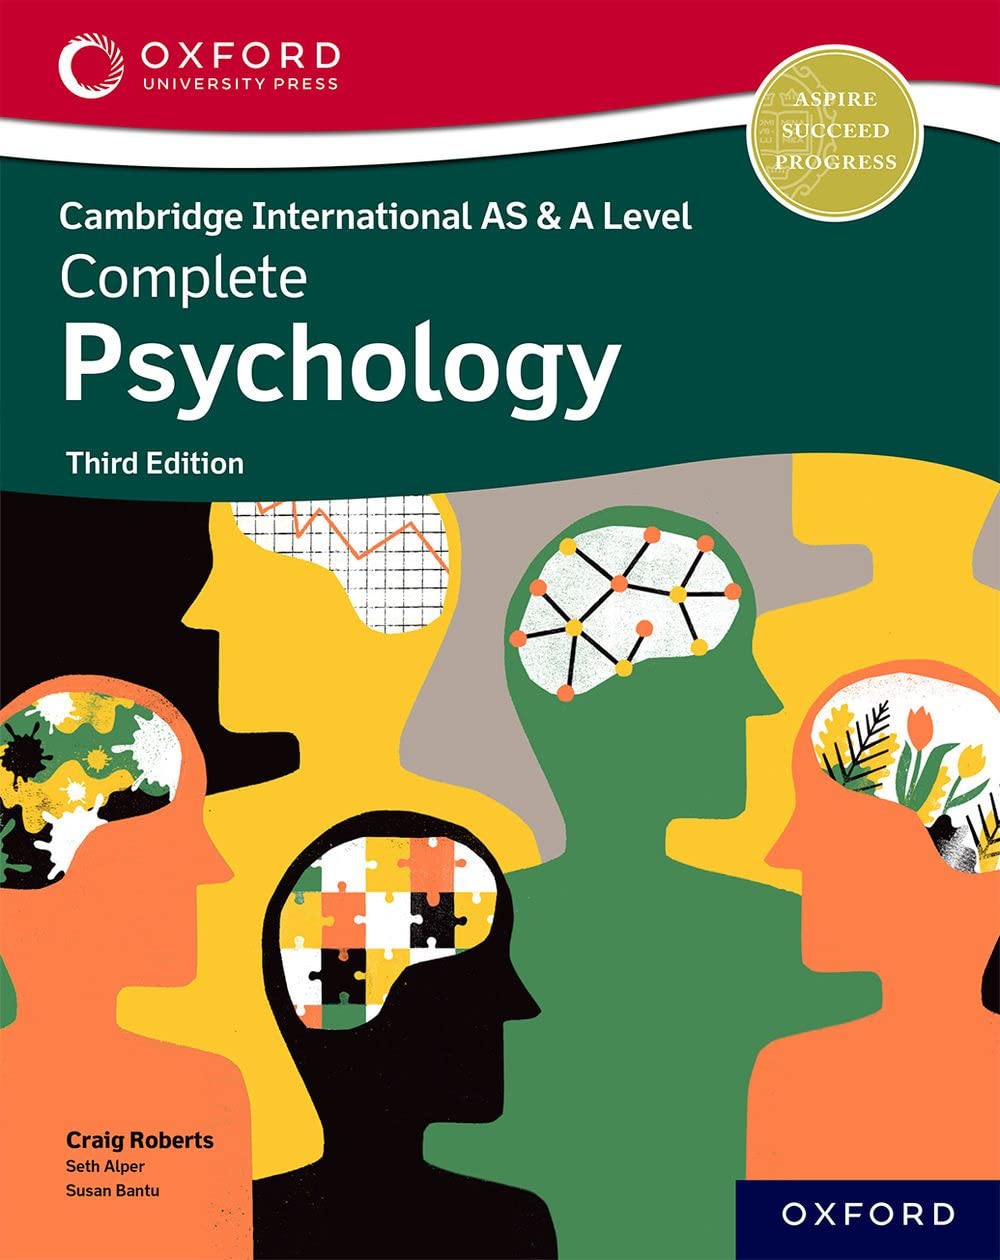 Oxford AS & A Level Complete Psychology: Third Edition Student Book